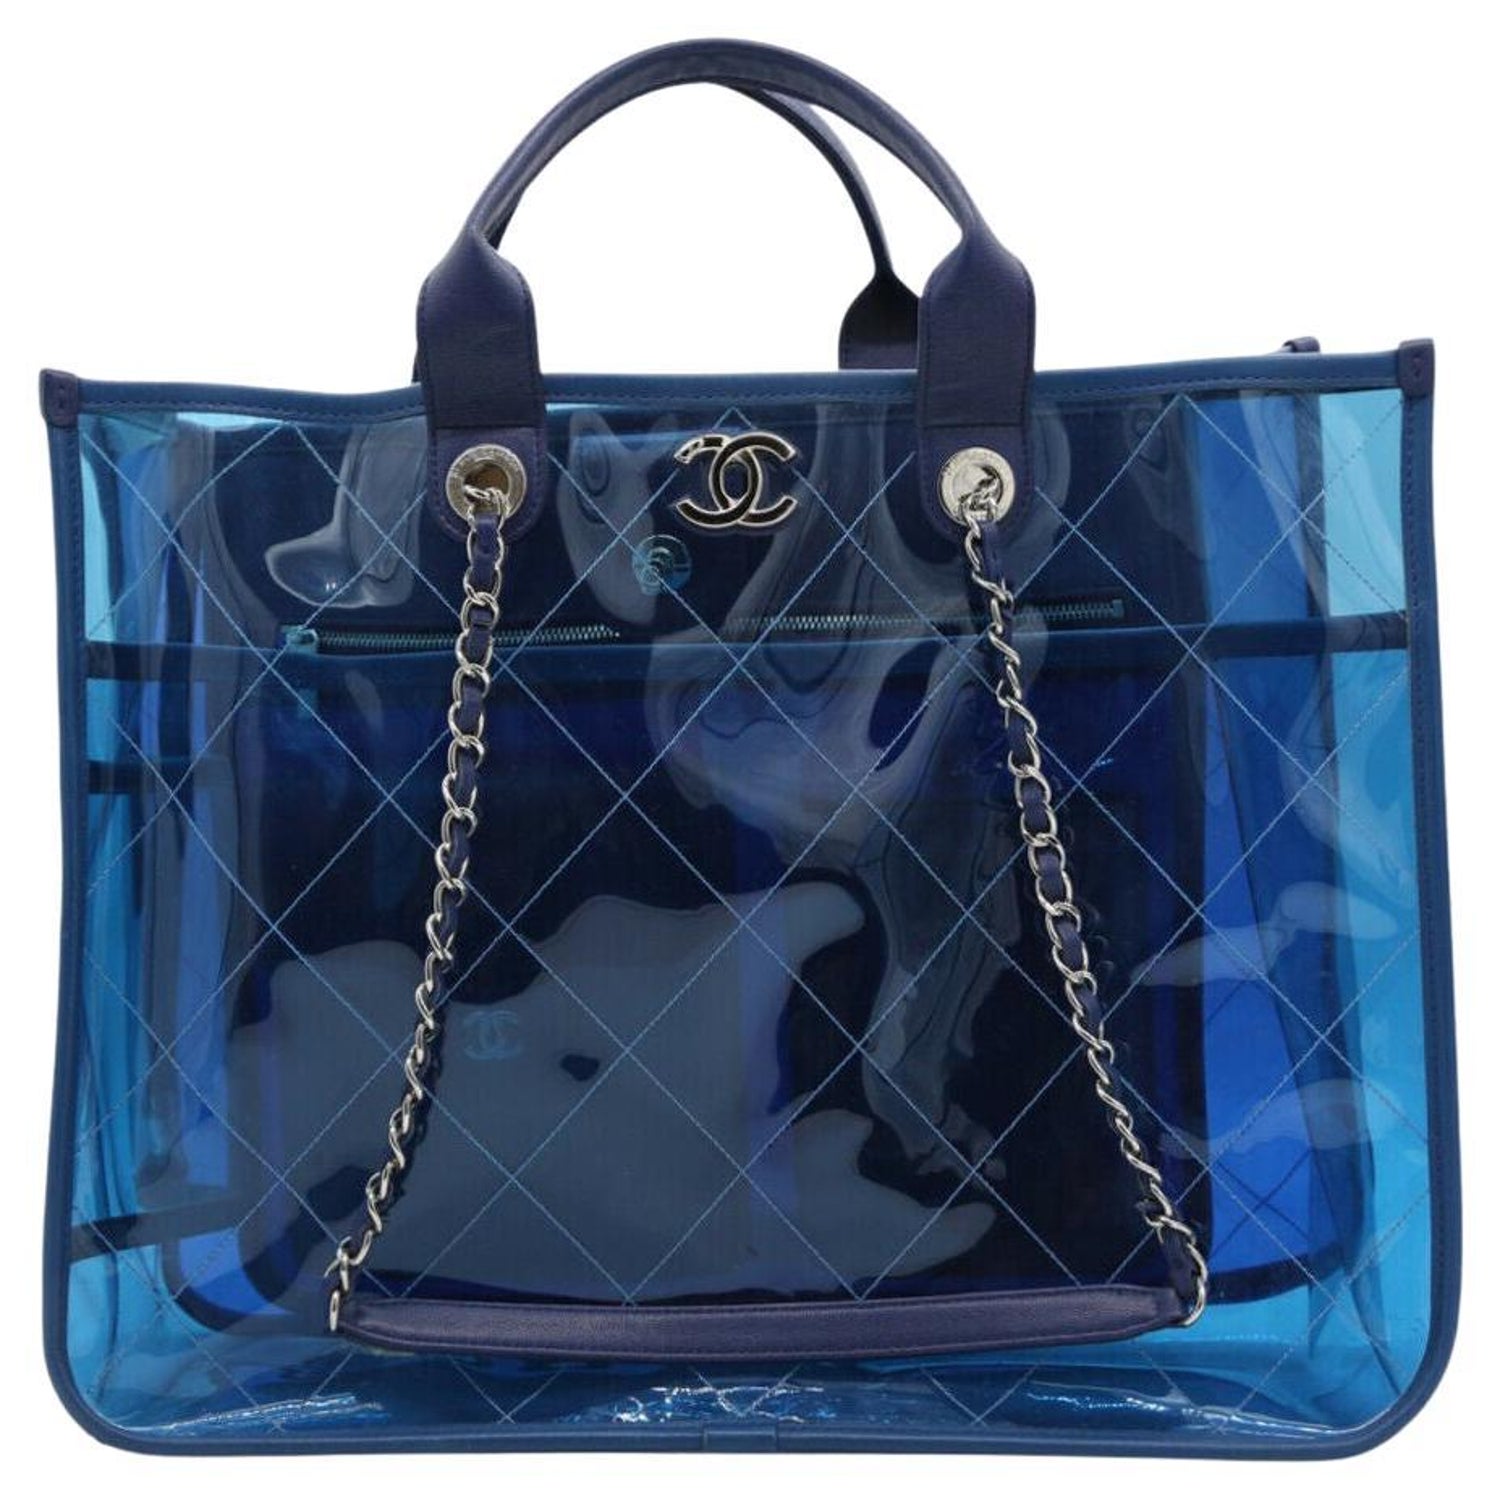 Chanel Blue Leather and PVC Coco Splash Tote Bag Chanel